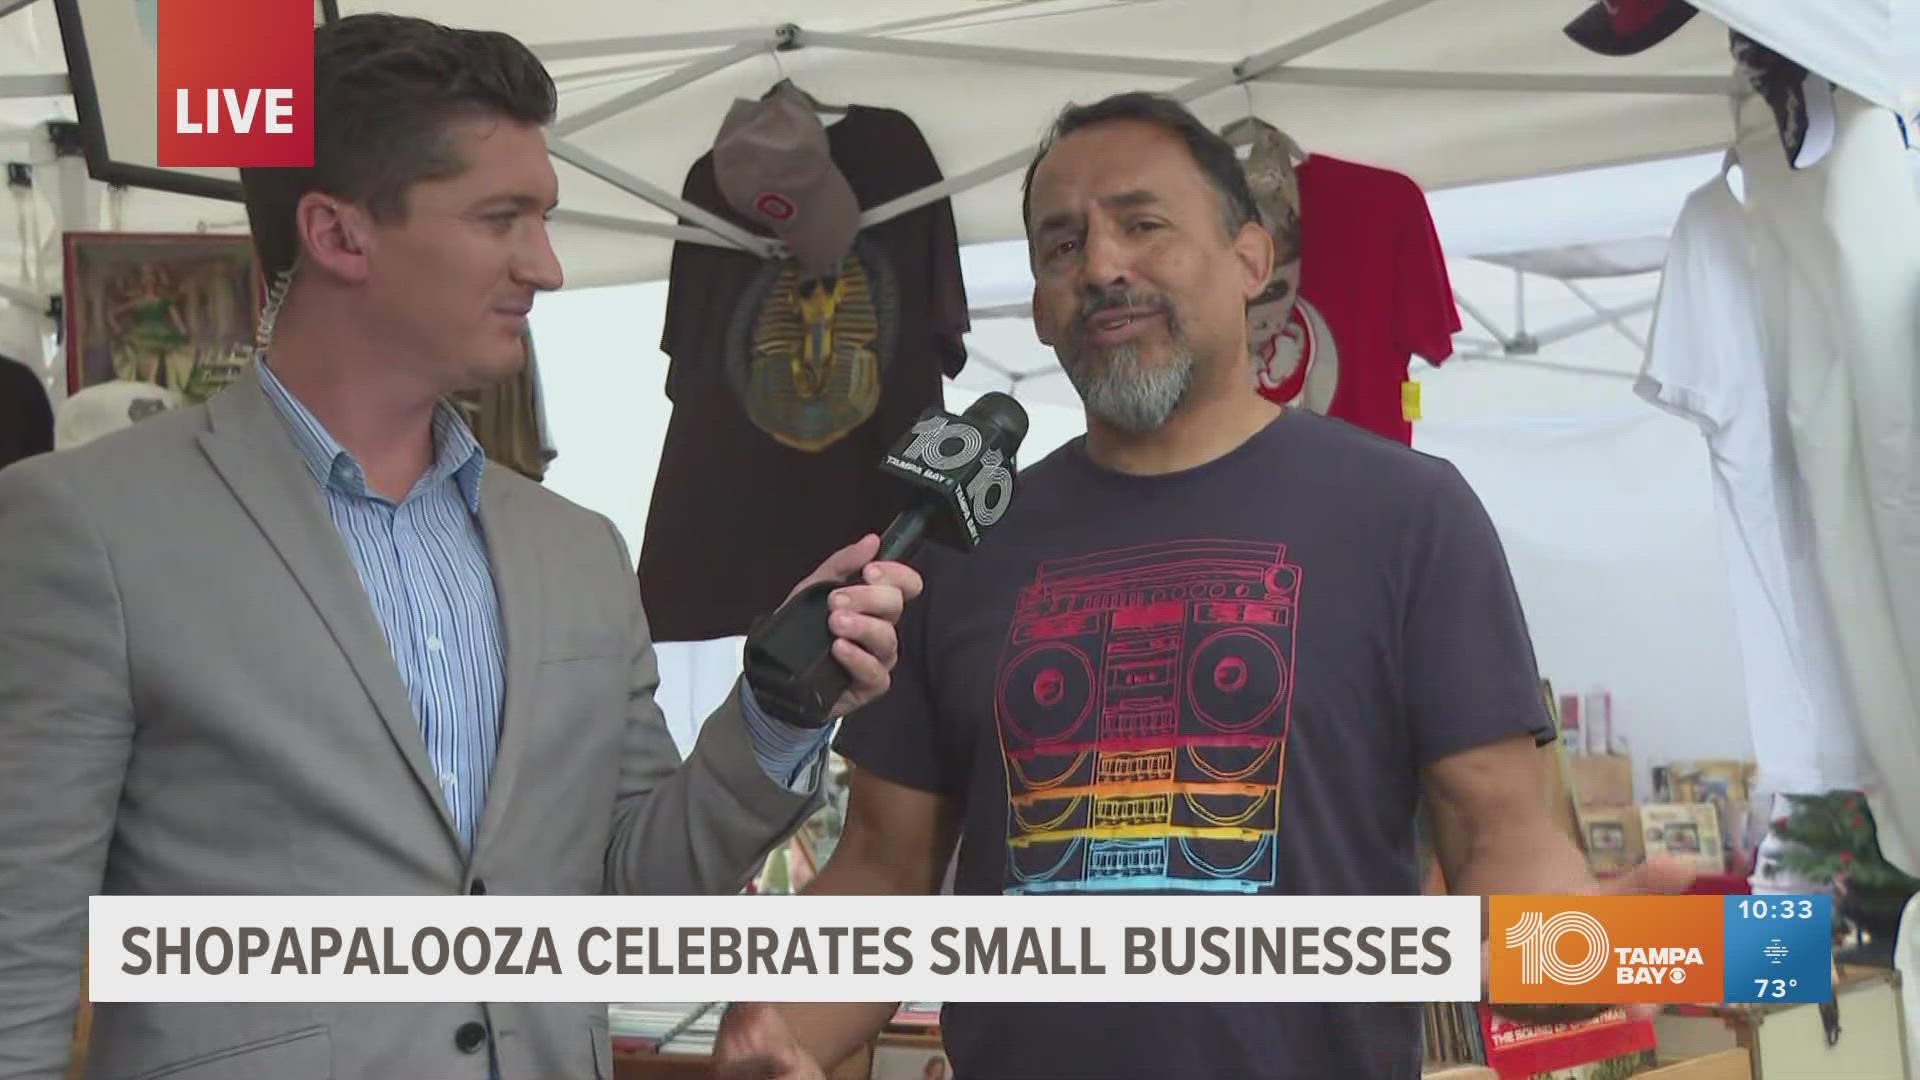 Events like Shopapalooza give small business owners the exposure they need to continue operating.